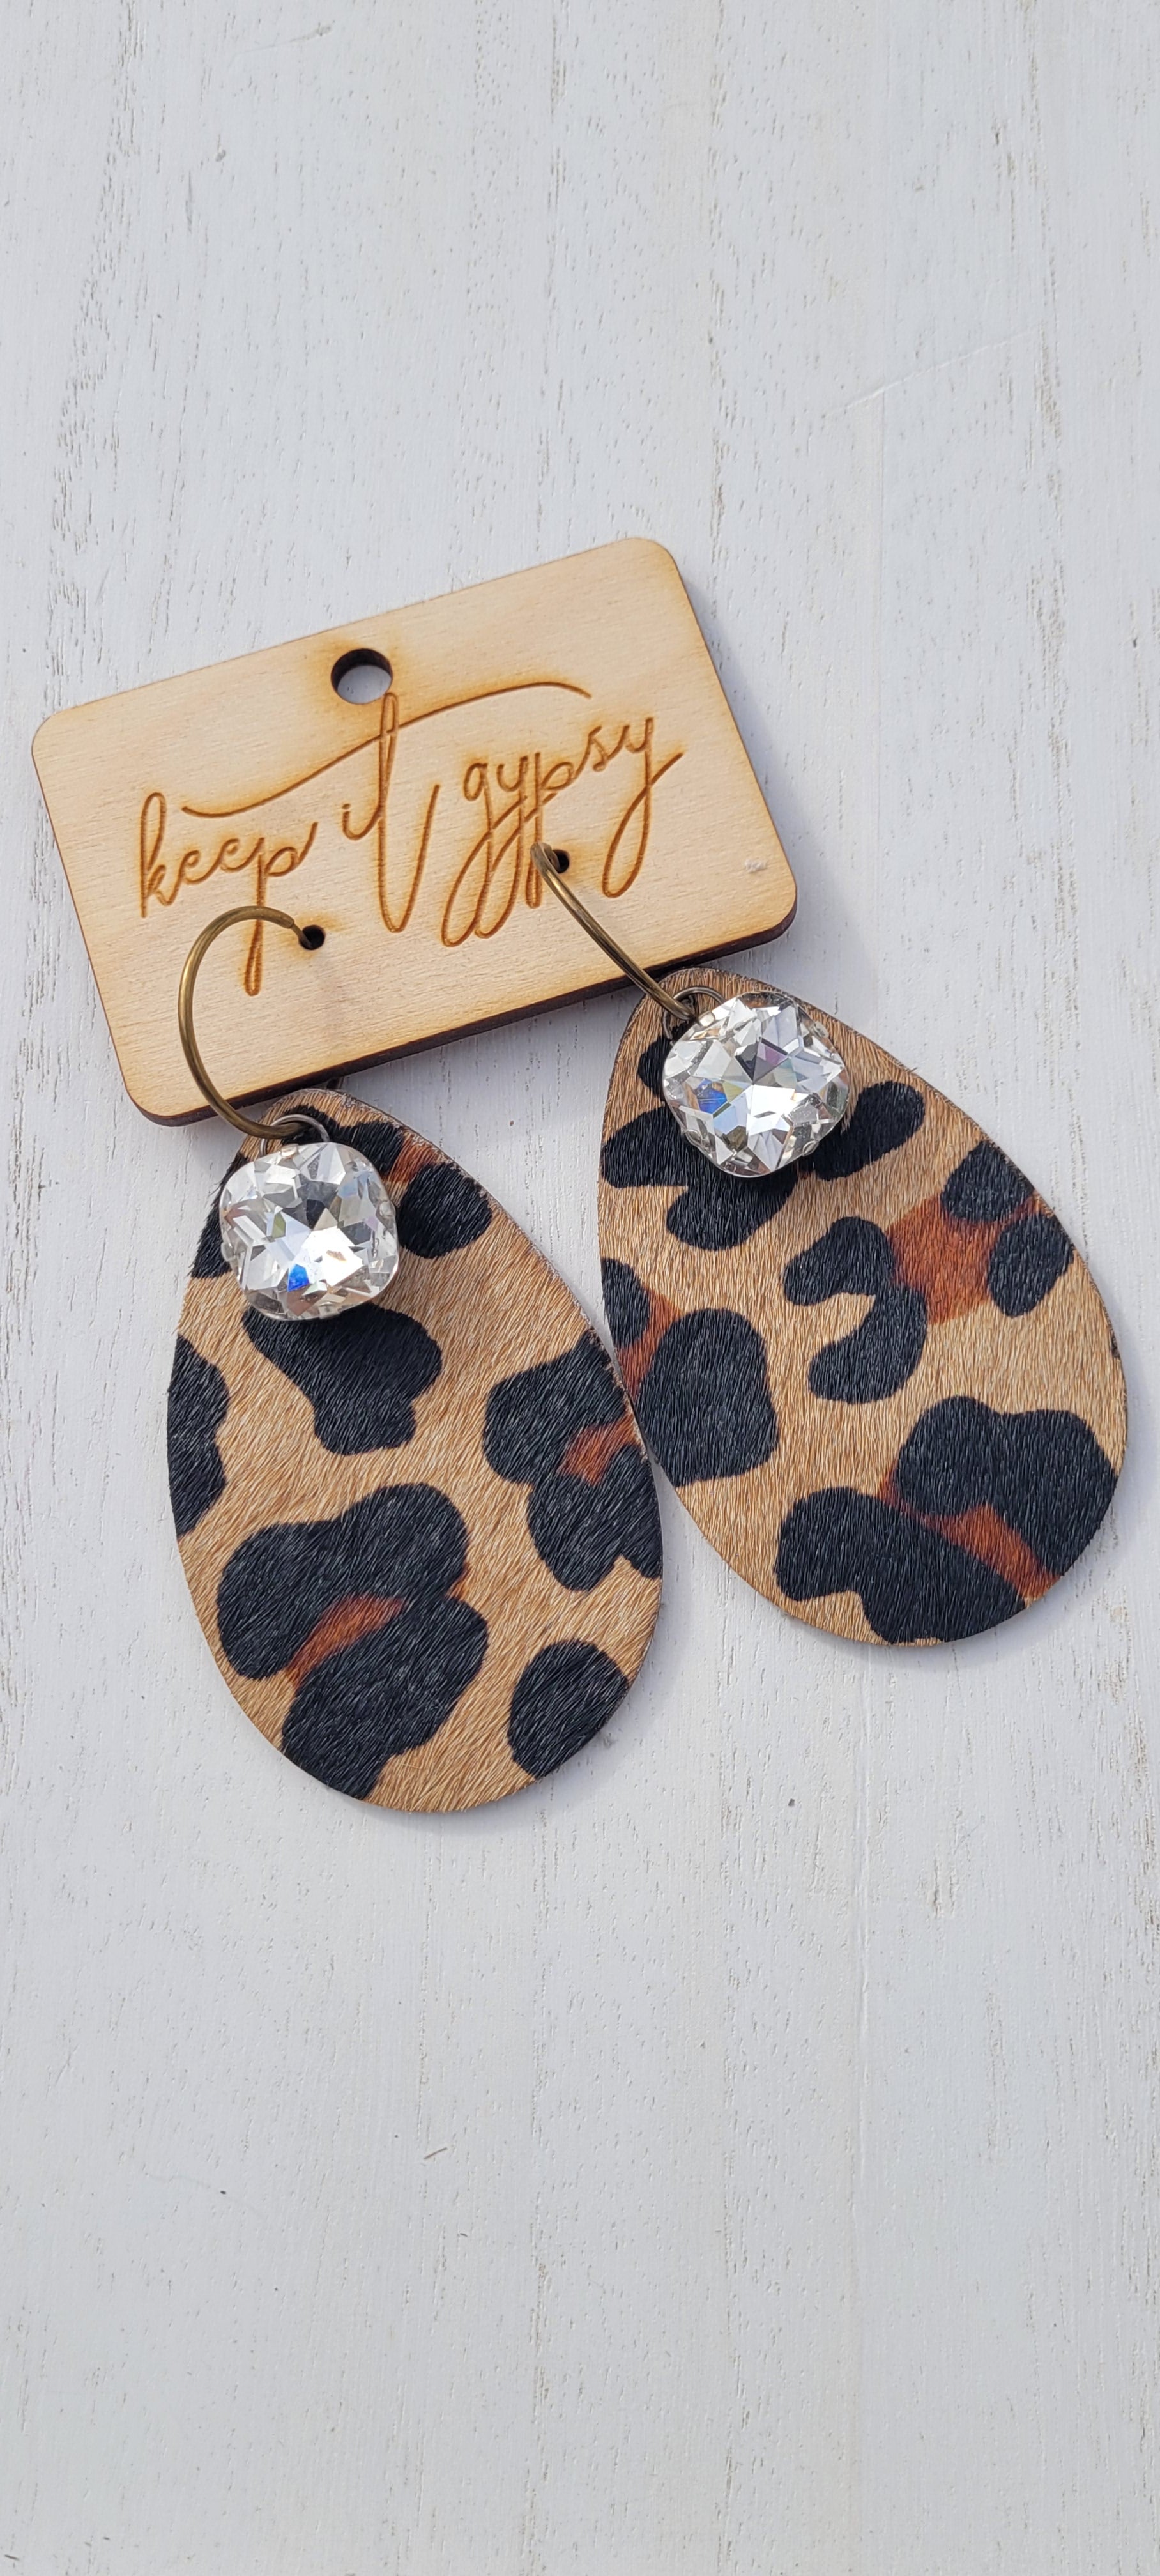 Upcycled Leather Leopard Print Cowhide Earrings Brown, Camel, Black Clear Crystals Limited supply!    Due to the nature of leather/suede, small variances of color in the skin may occur, this is in no way considered a defect. These are inherent characteristics of leather/suede and will enhance the individual look of your garment.   